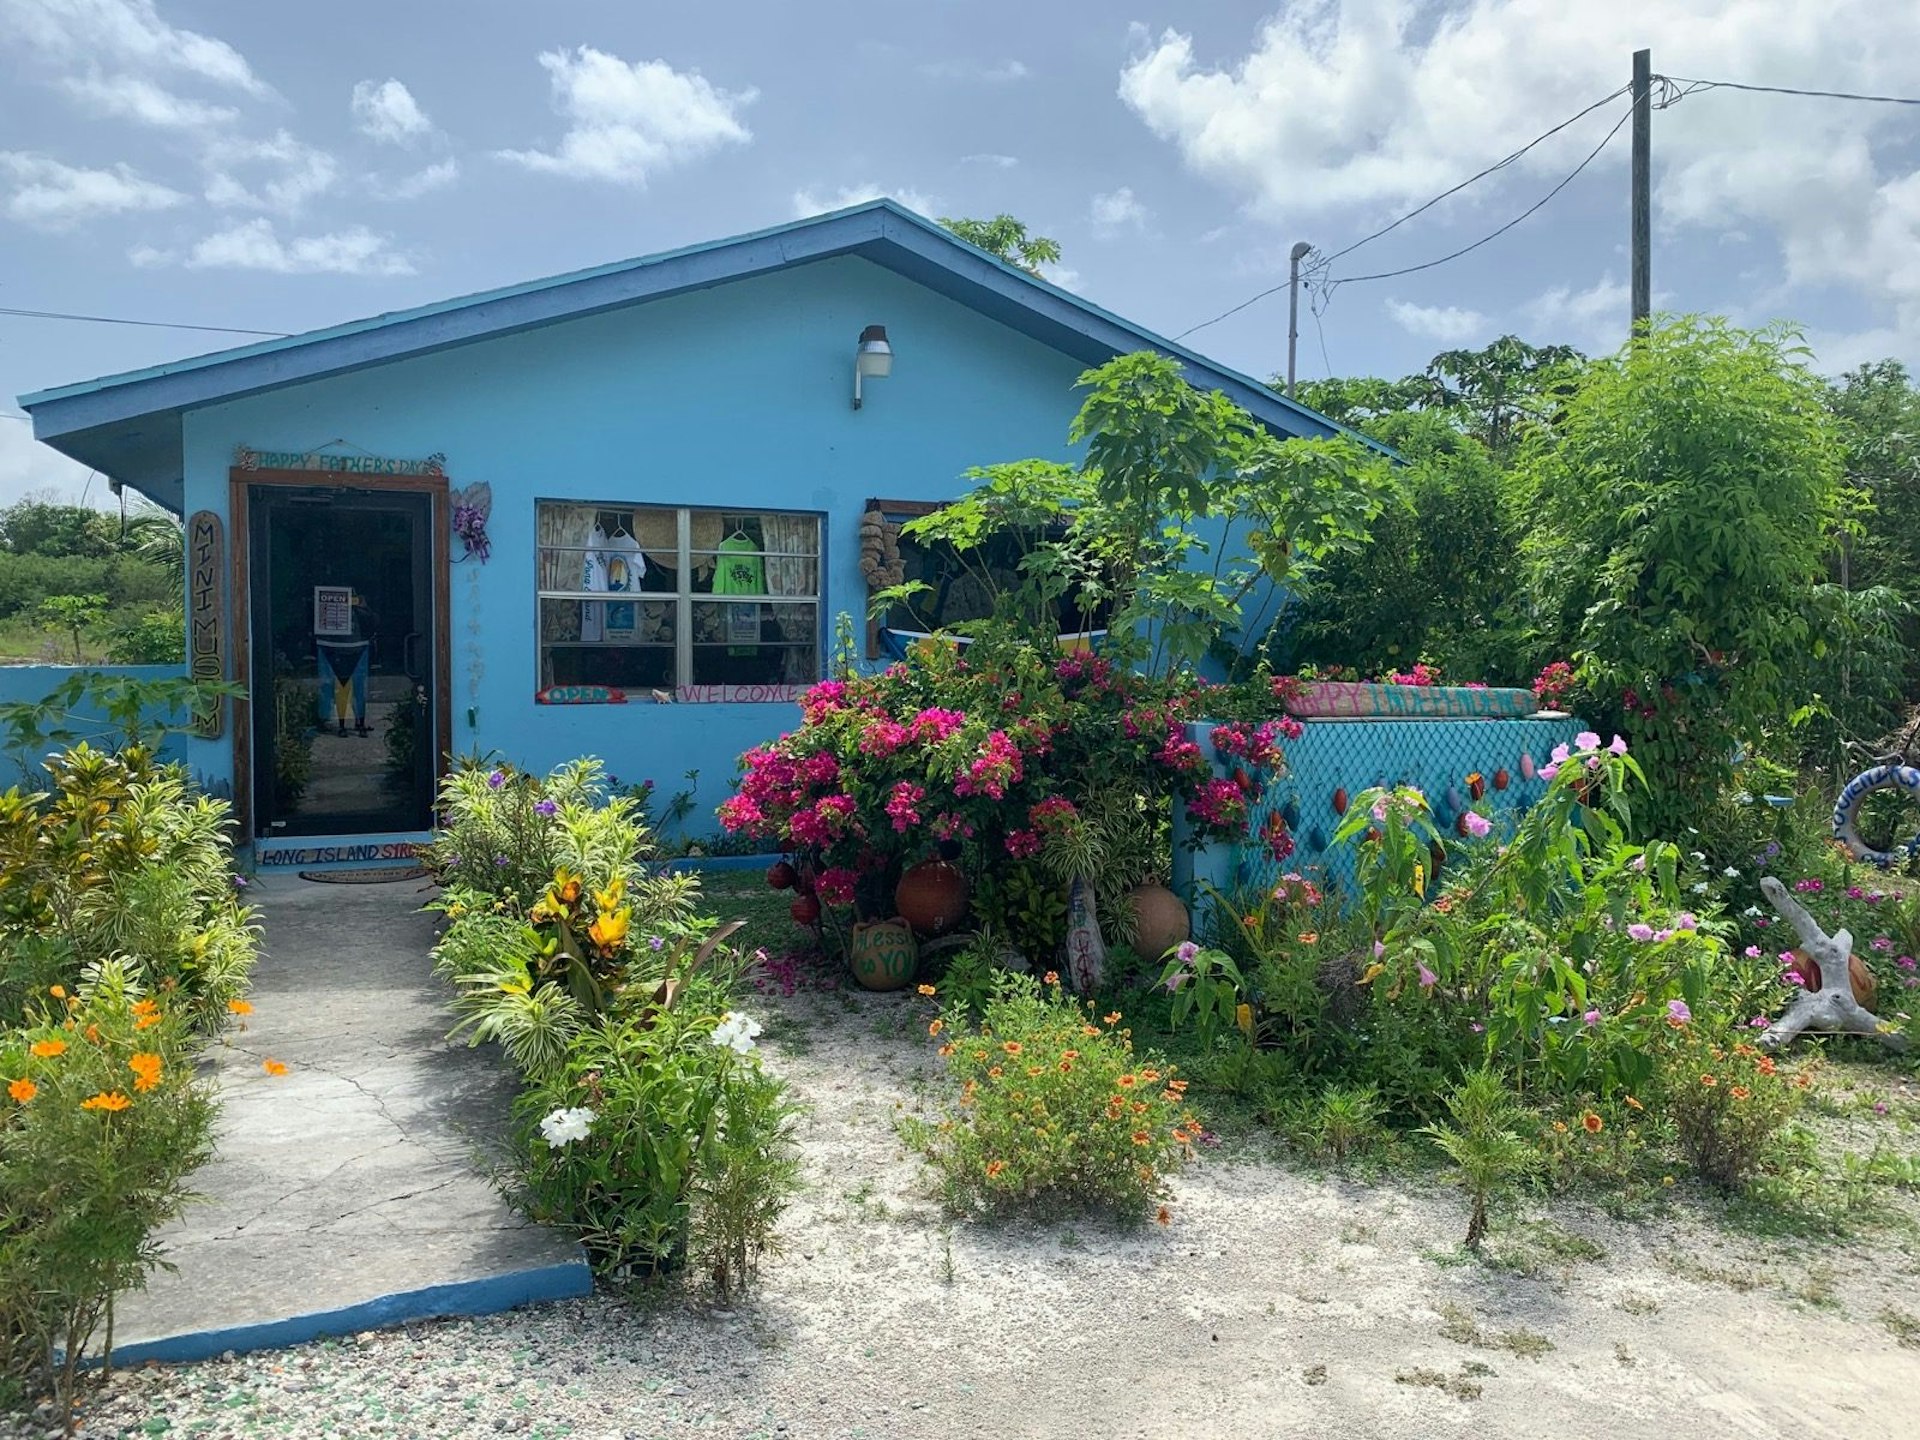 A large garden filled with colorful bright pink and yellow flowers in front of a bright blue house; Long Island Bahamas 